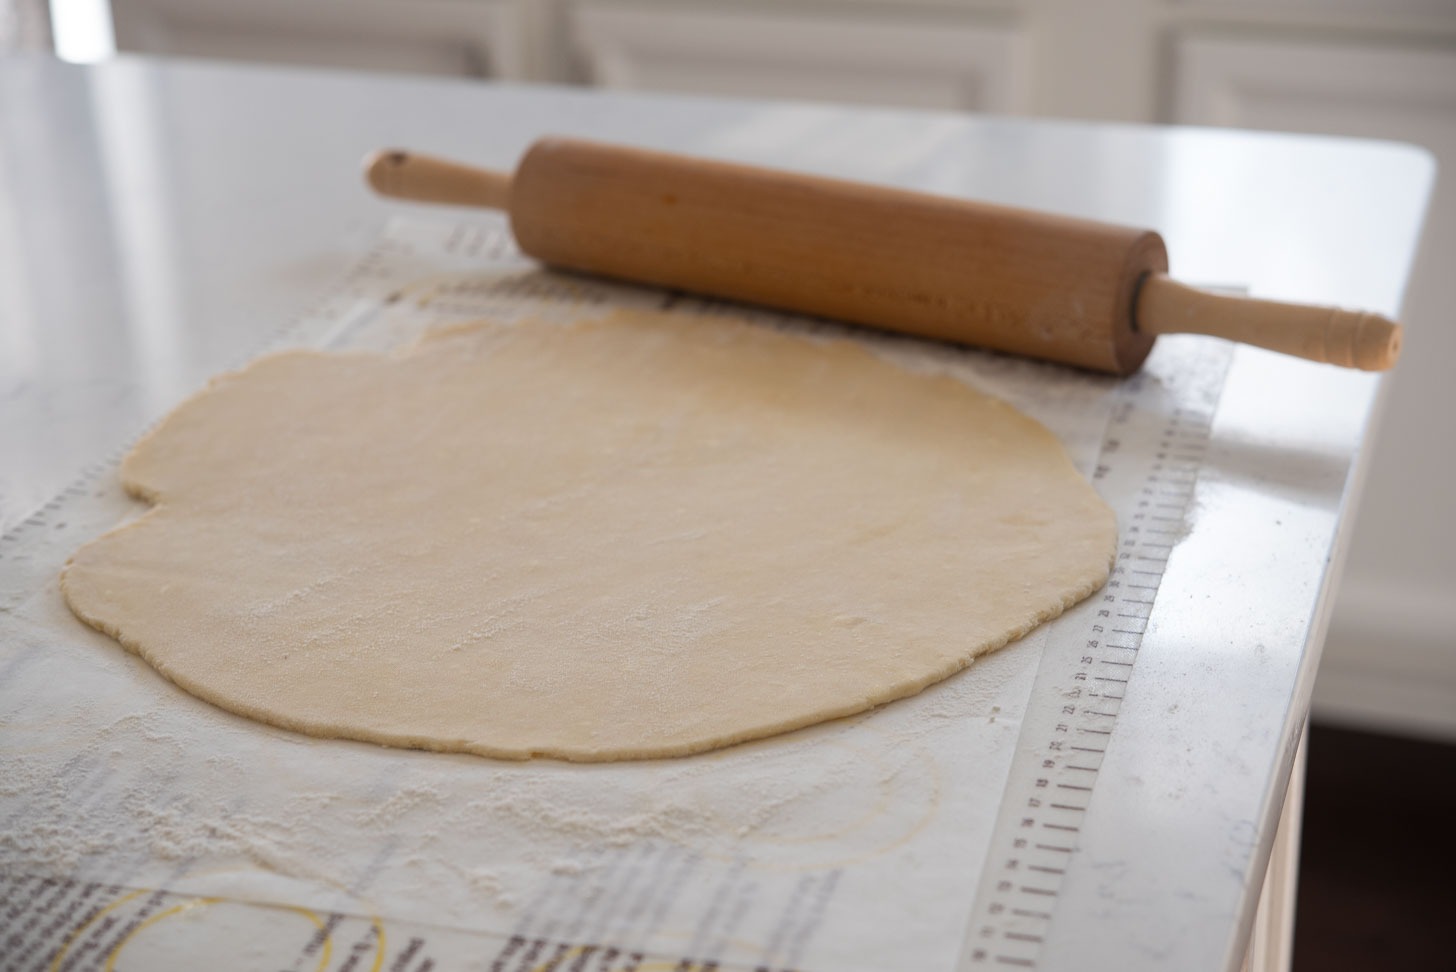 Homemade pie crust is rolled out with a rolling pin.